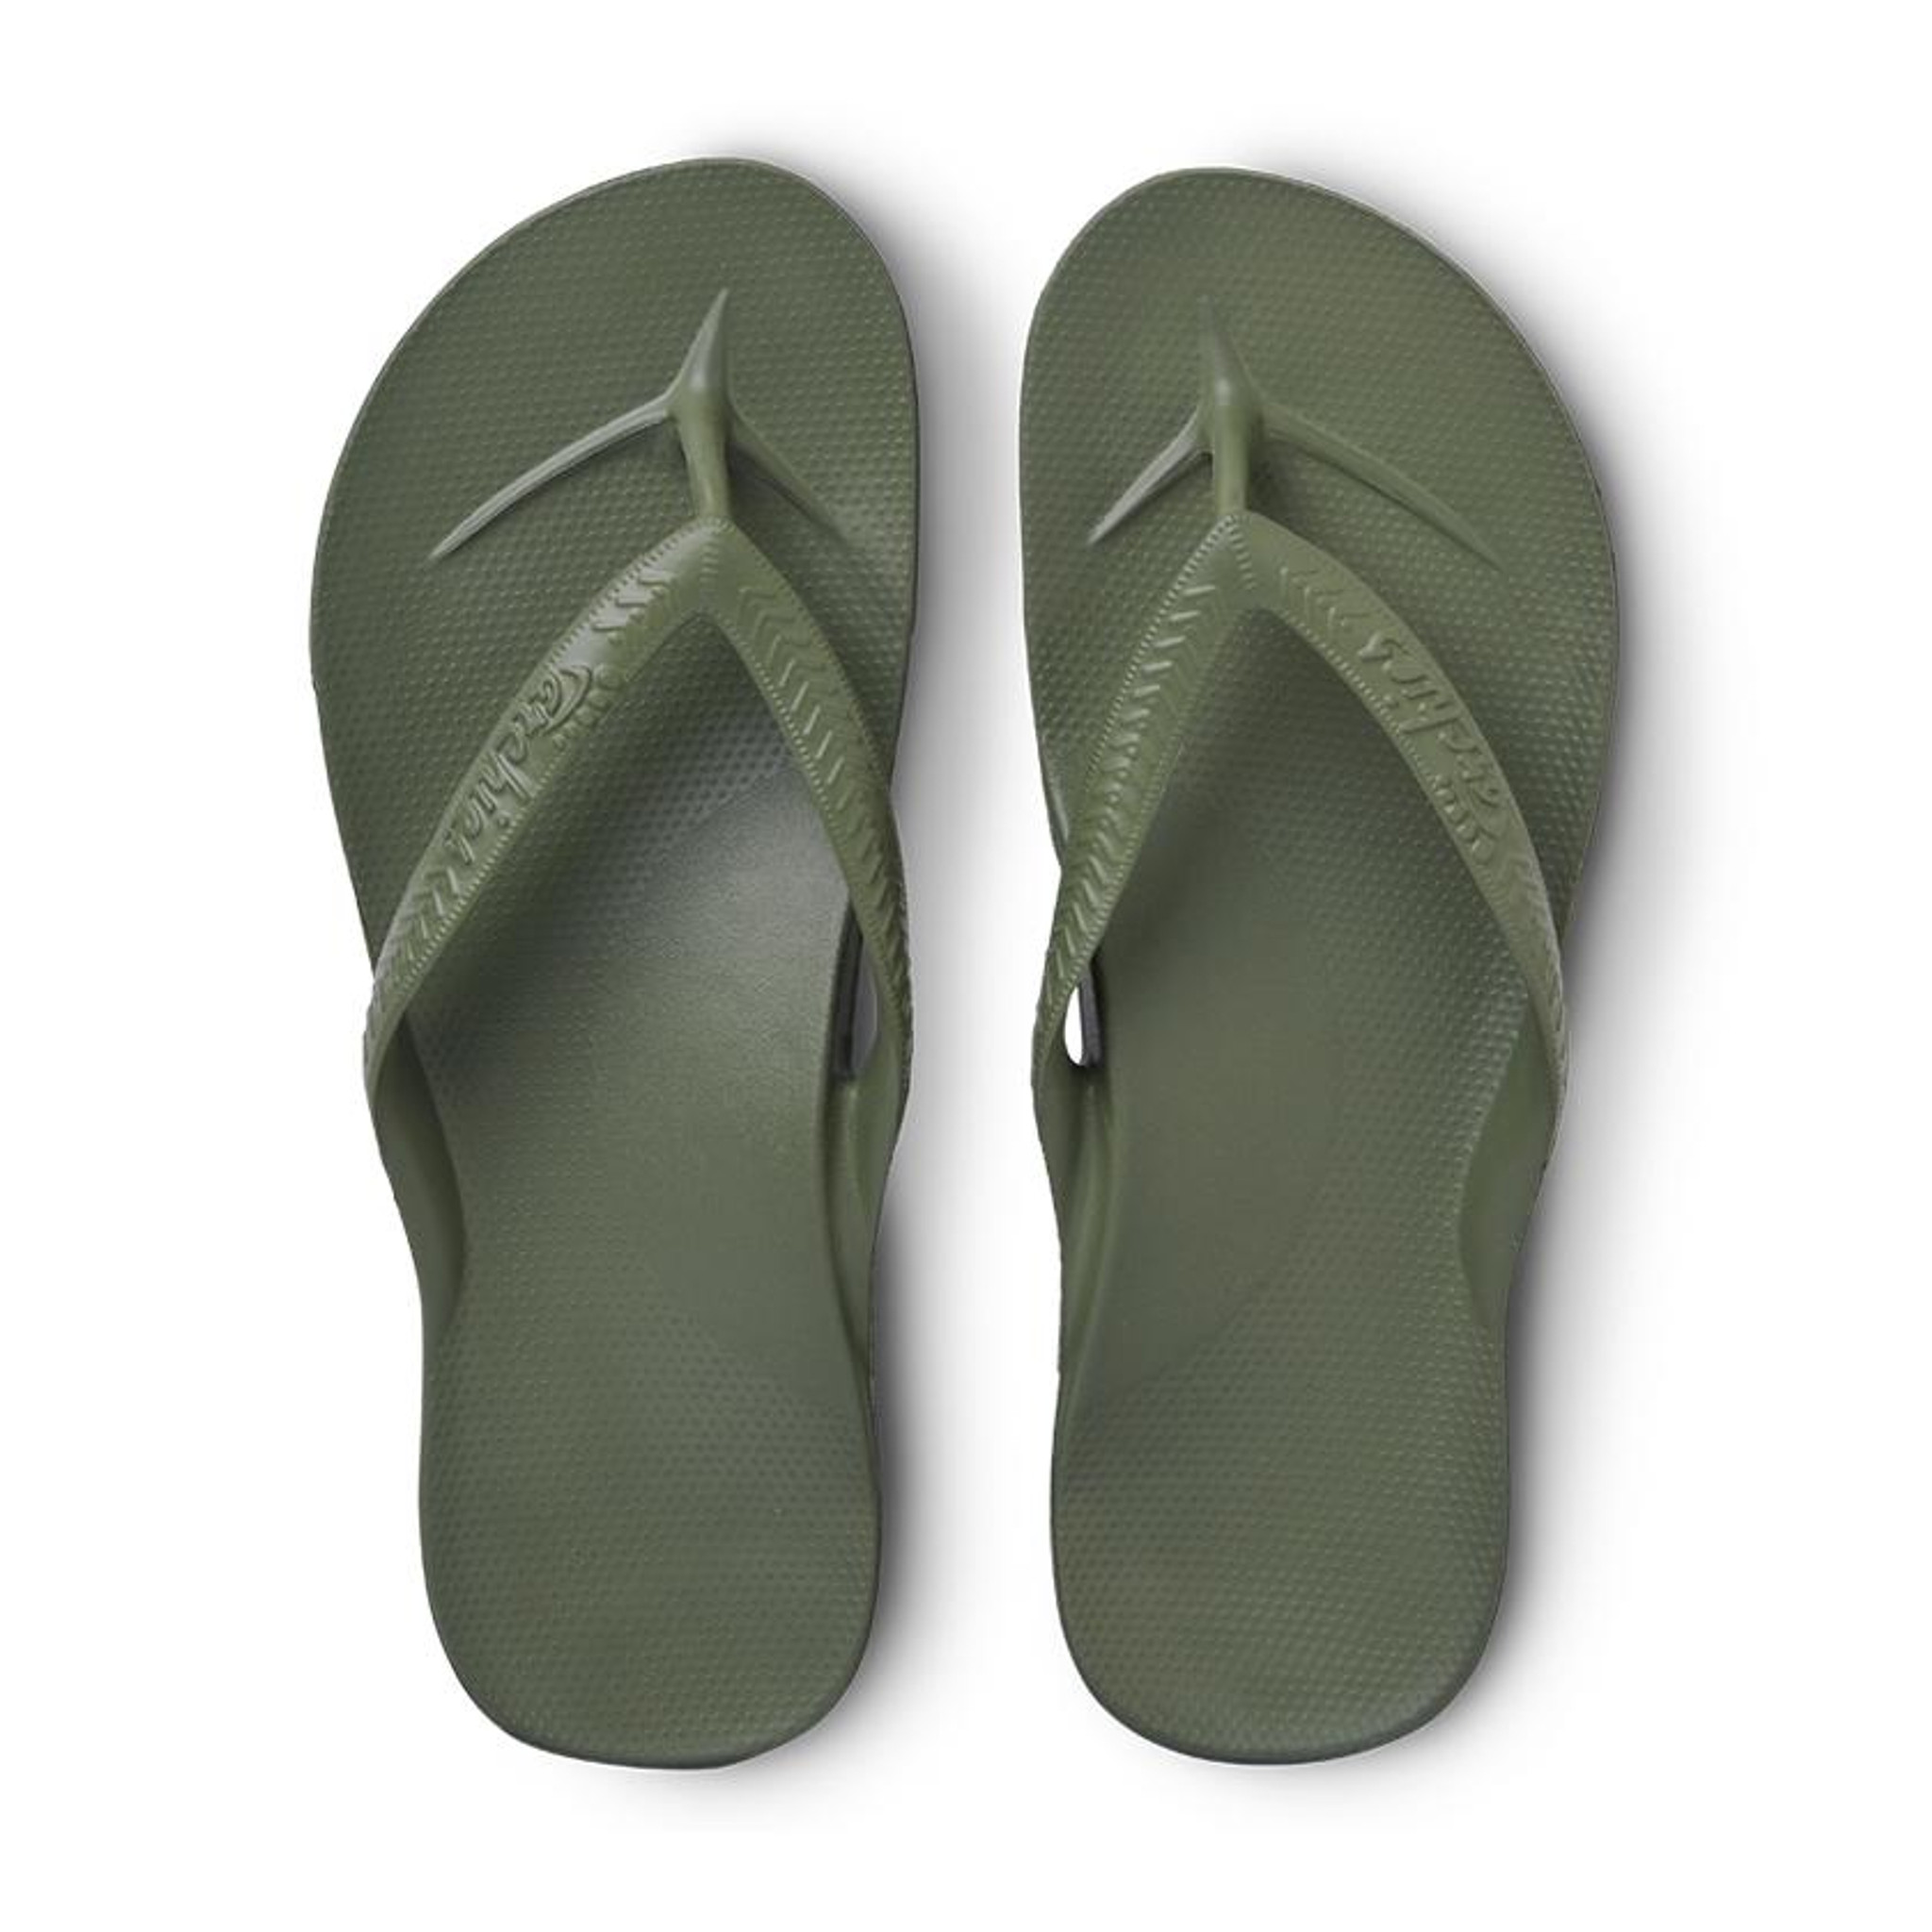 Khaki Olive Arch Support Flip Flops - The Boot Life, LLC